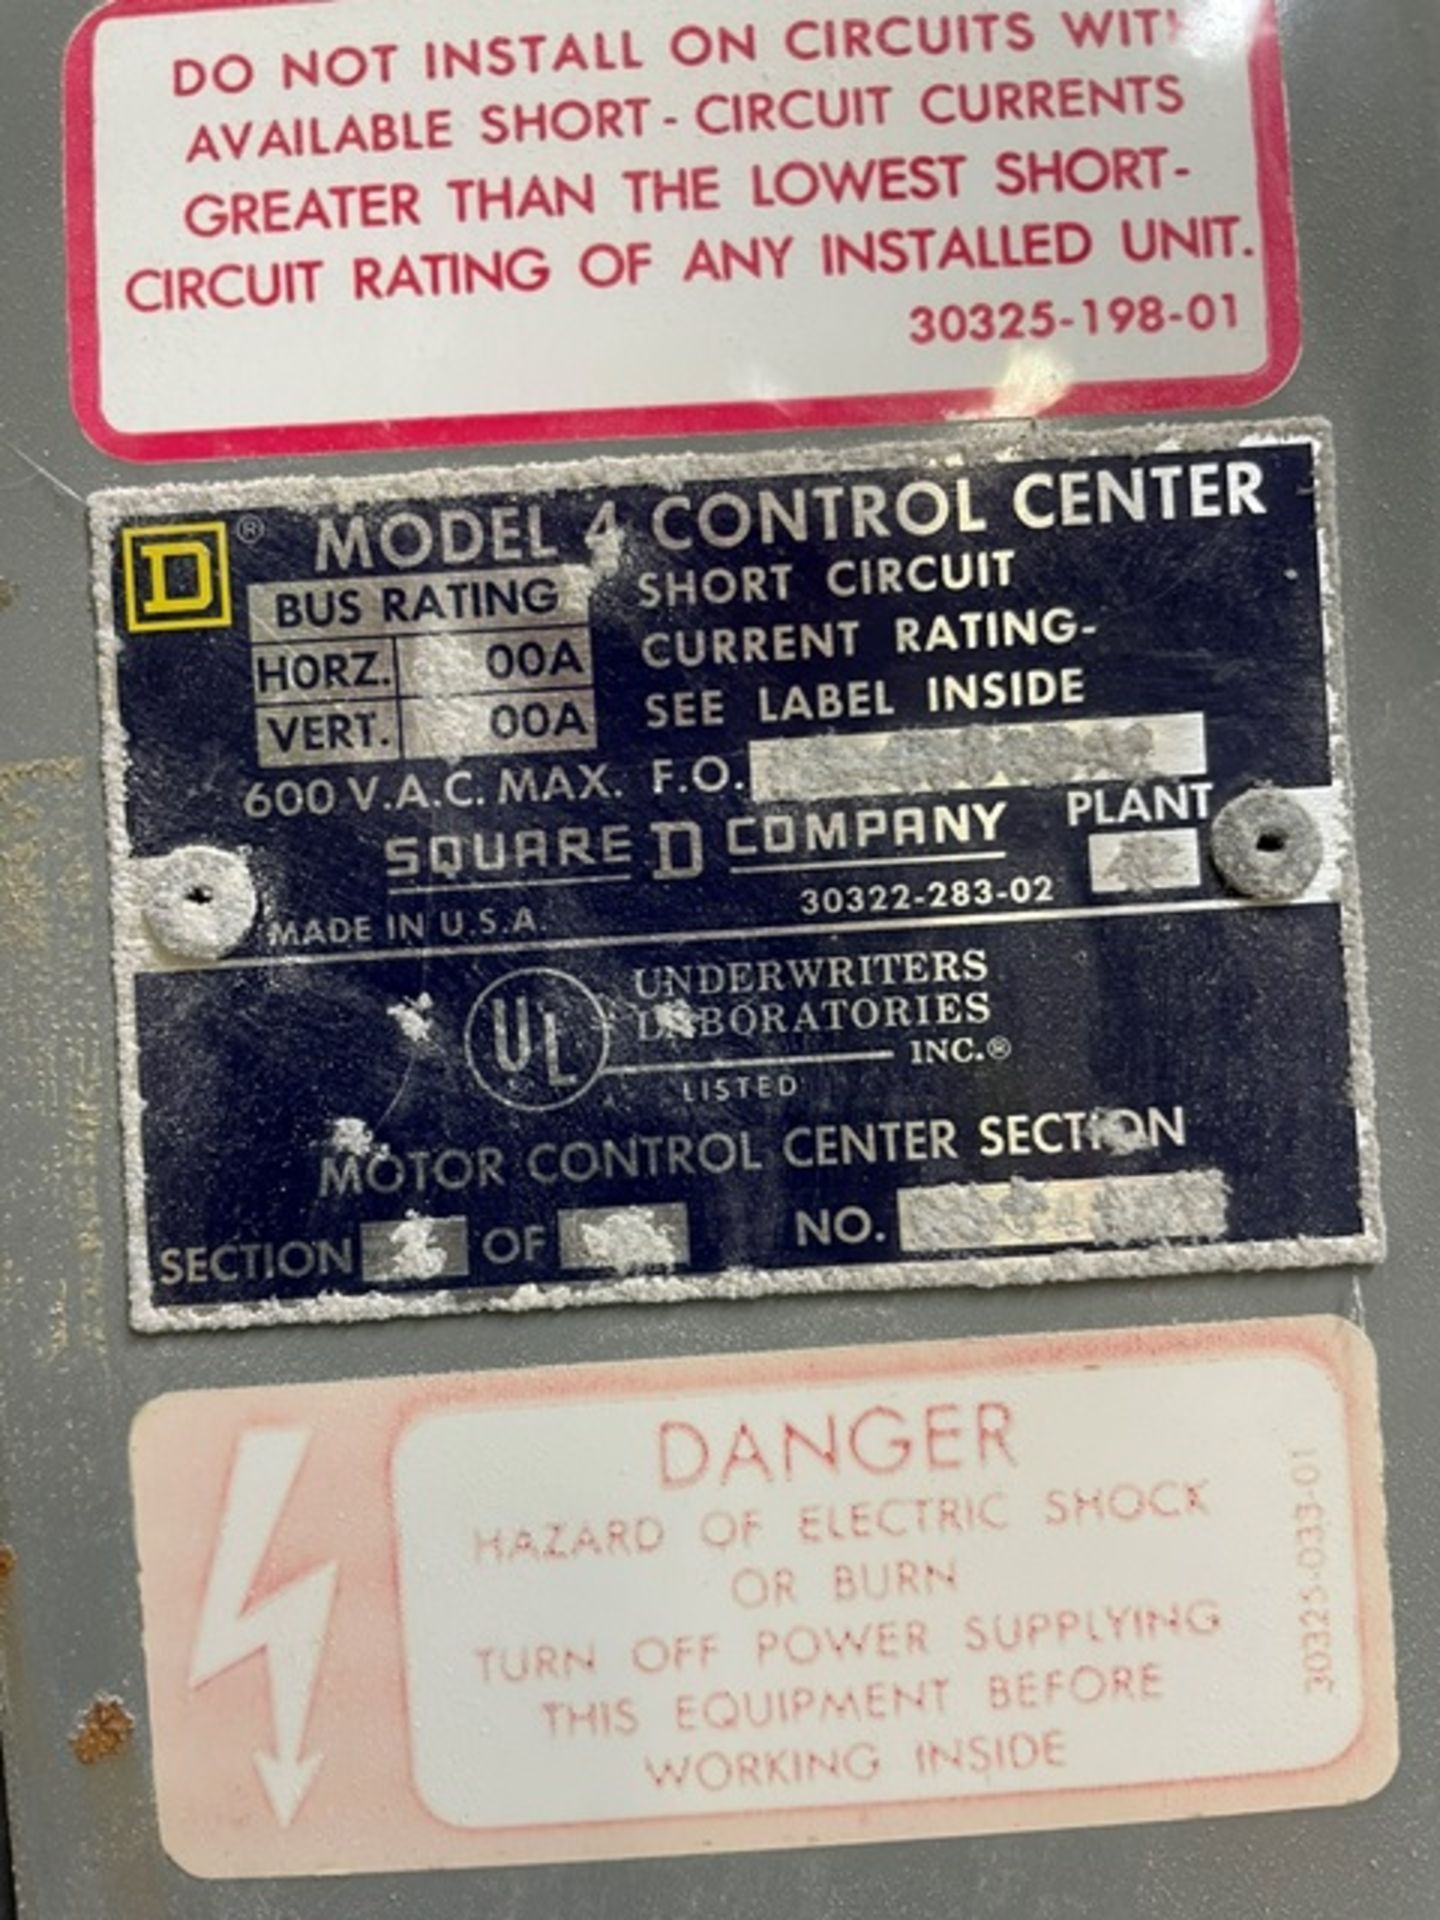 Square D Motor Control Center - Image 3 of 4